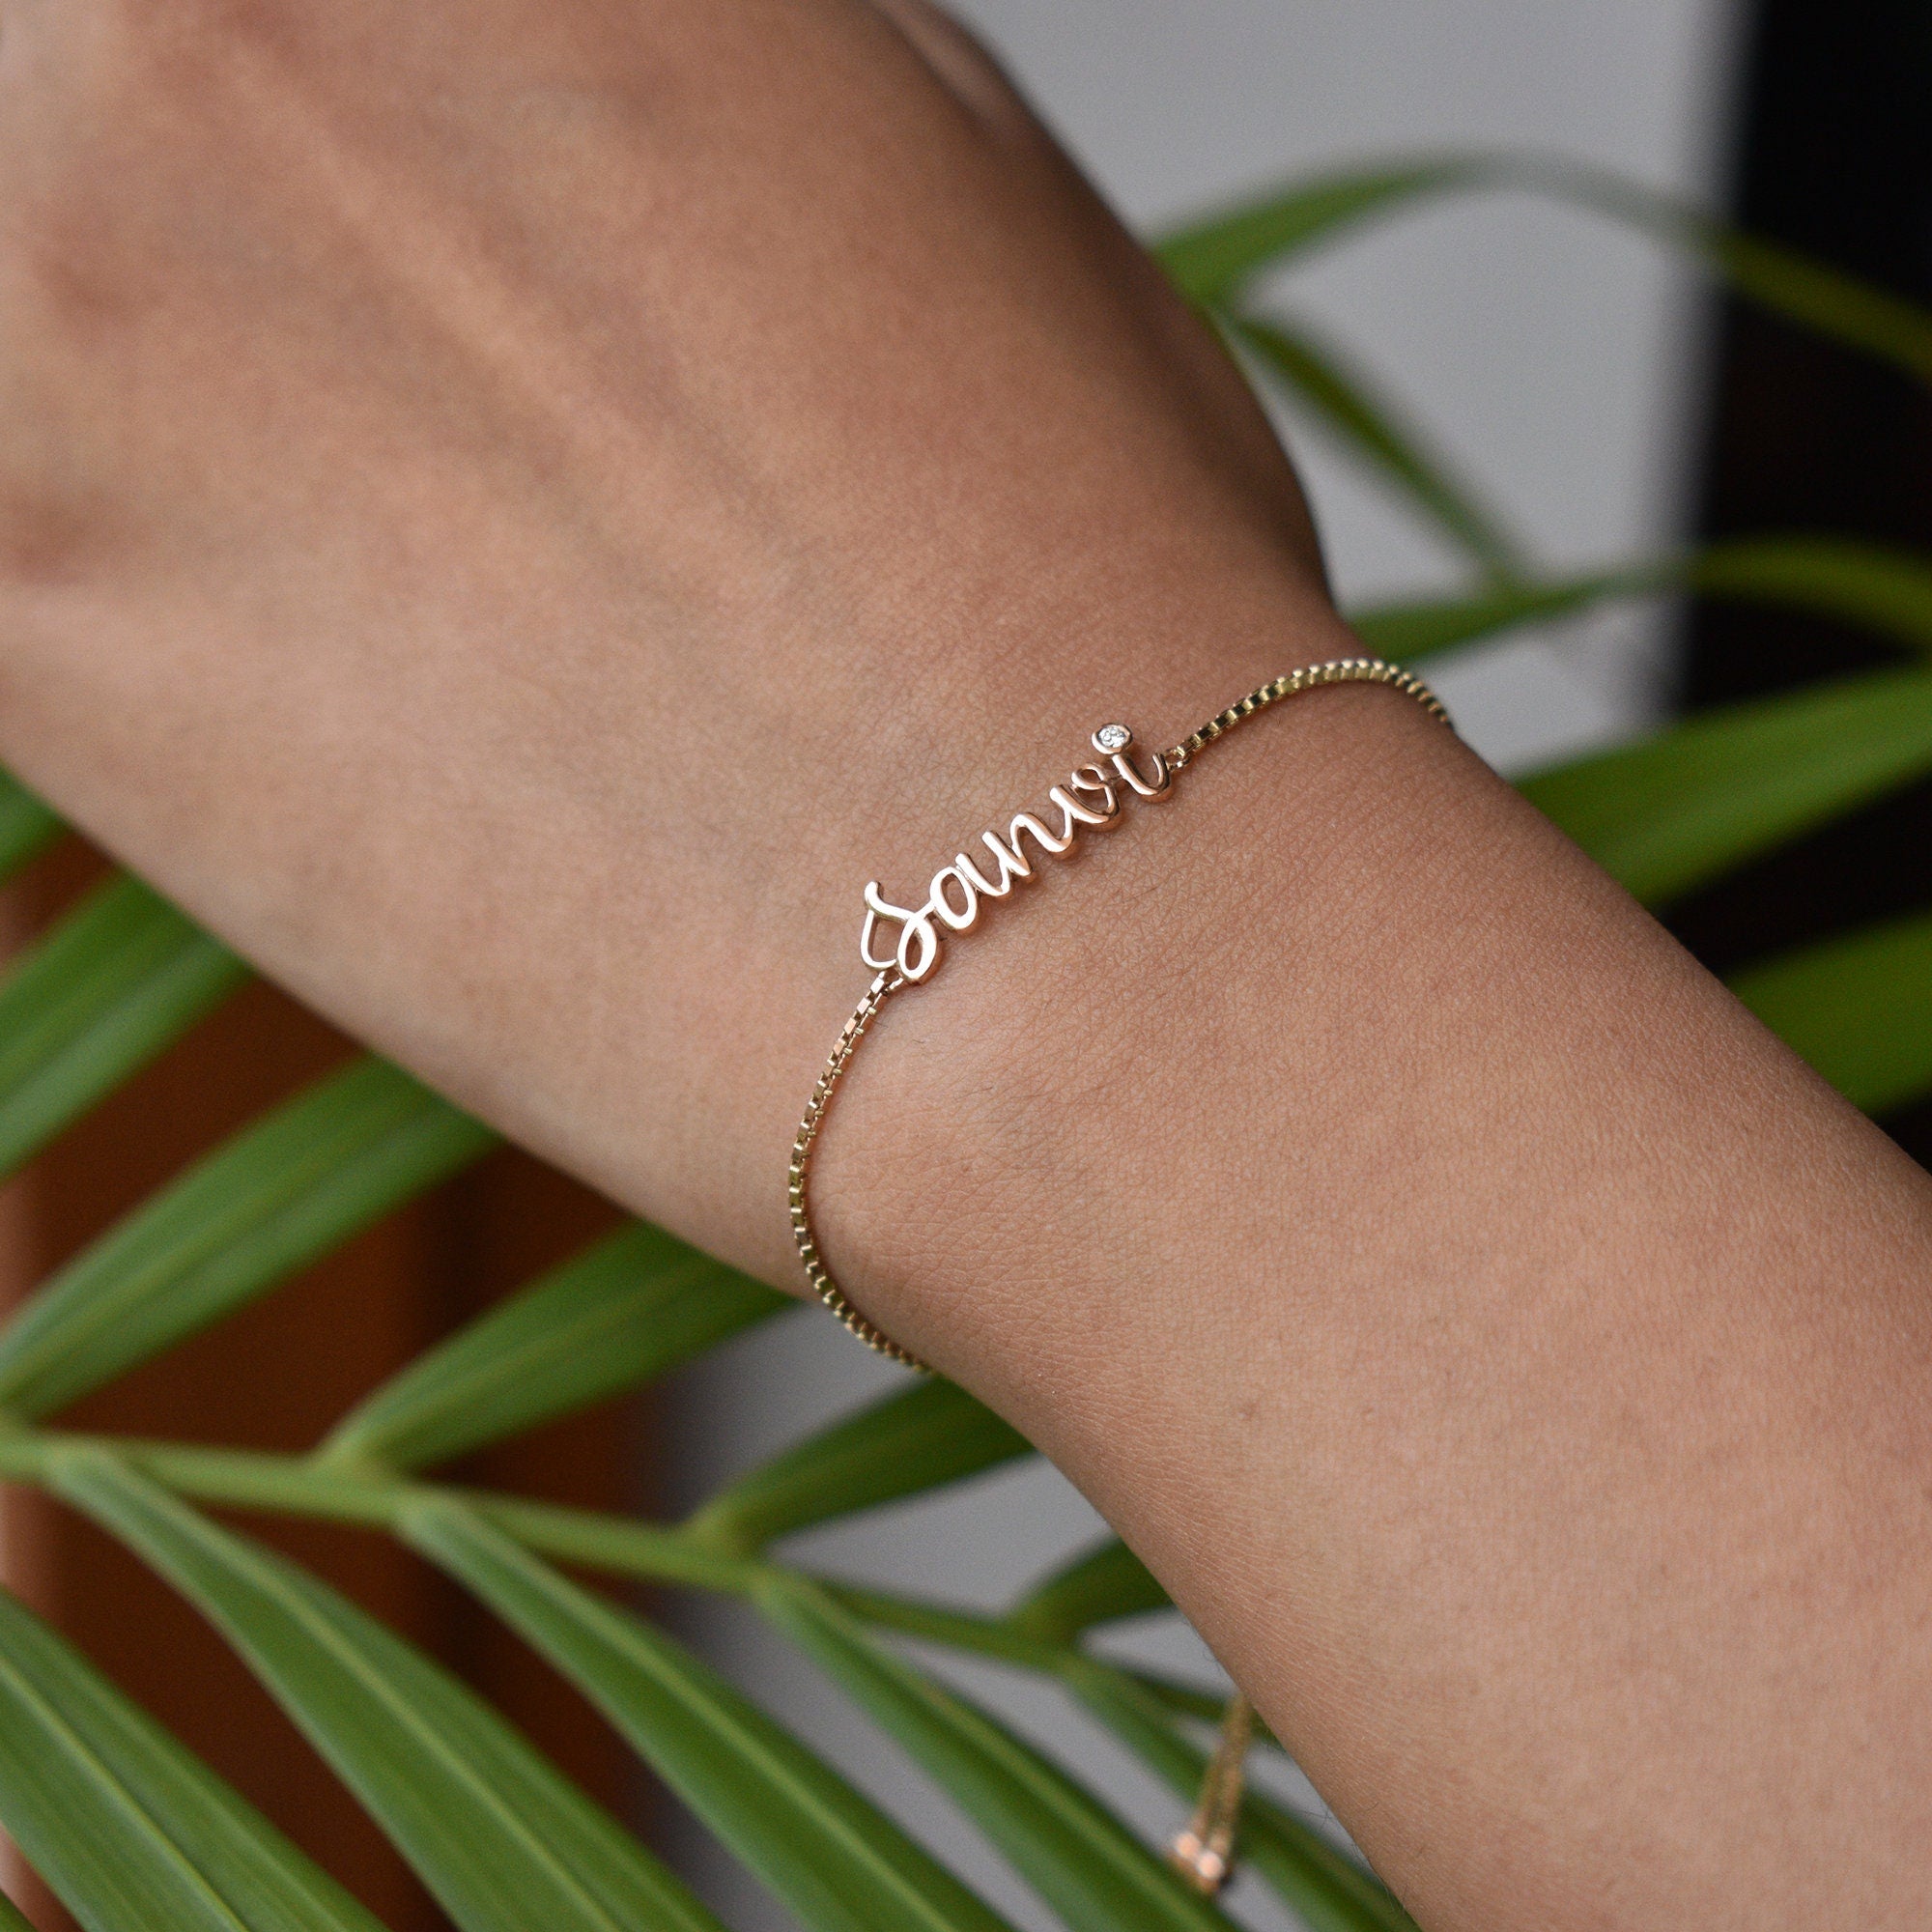 Fully customizable stack of 5 name/alphabet bracelets in gold